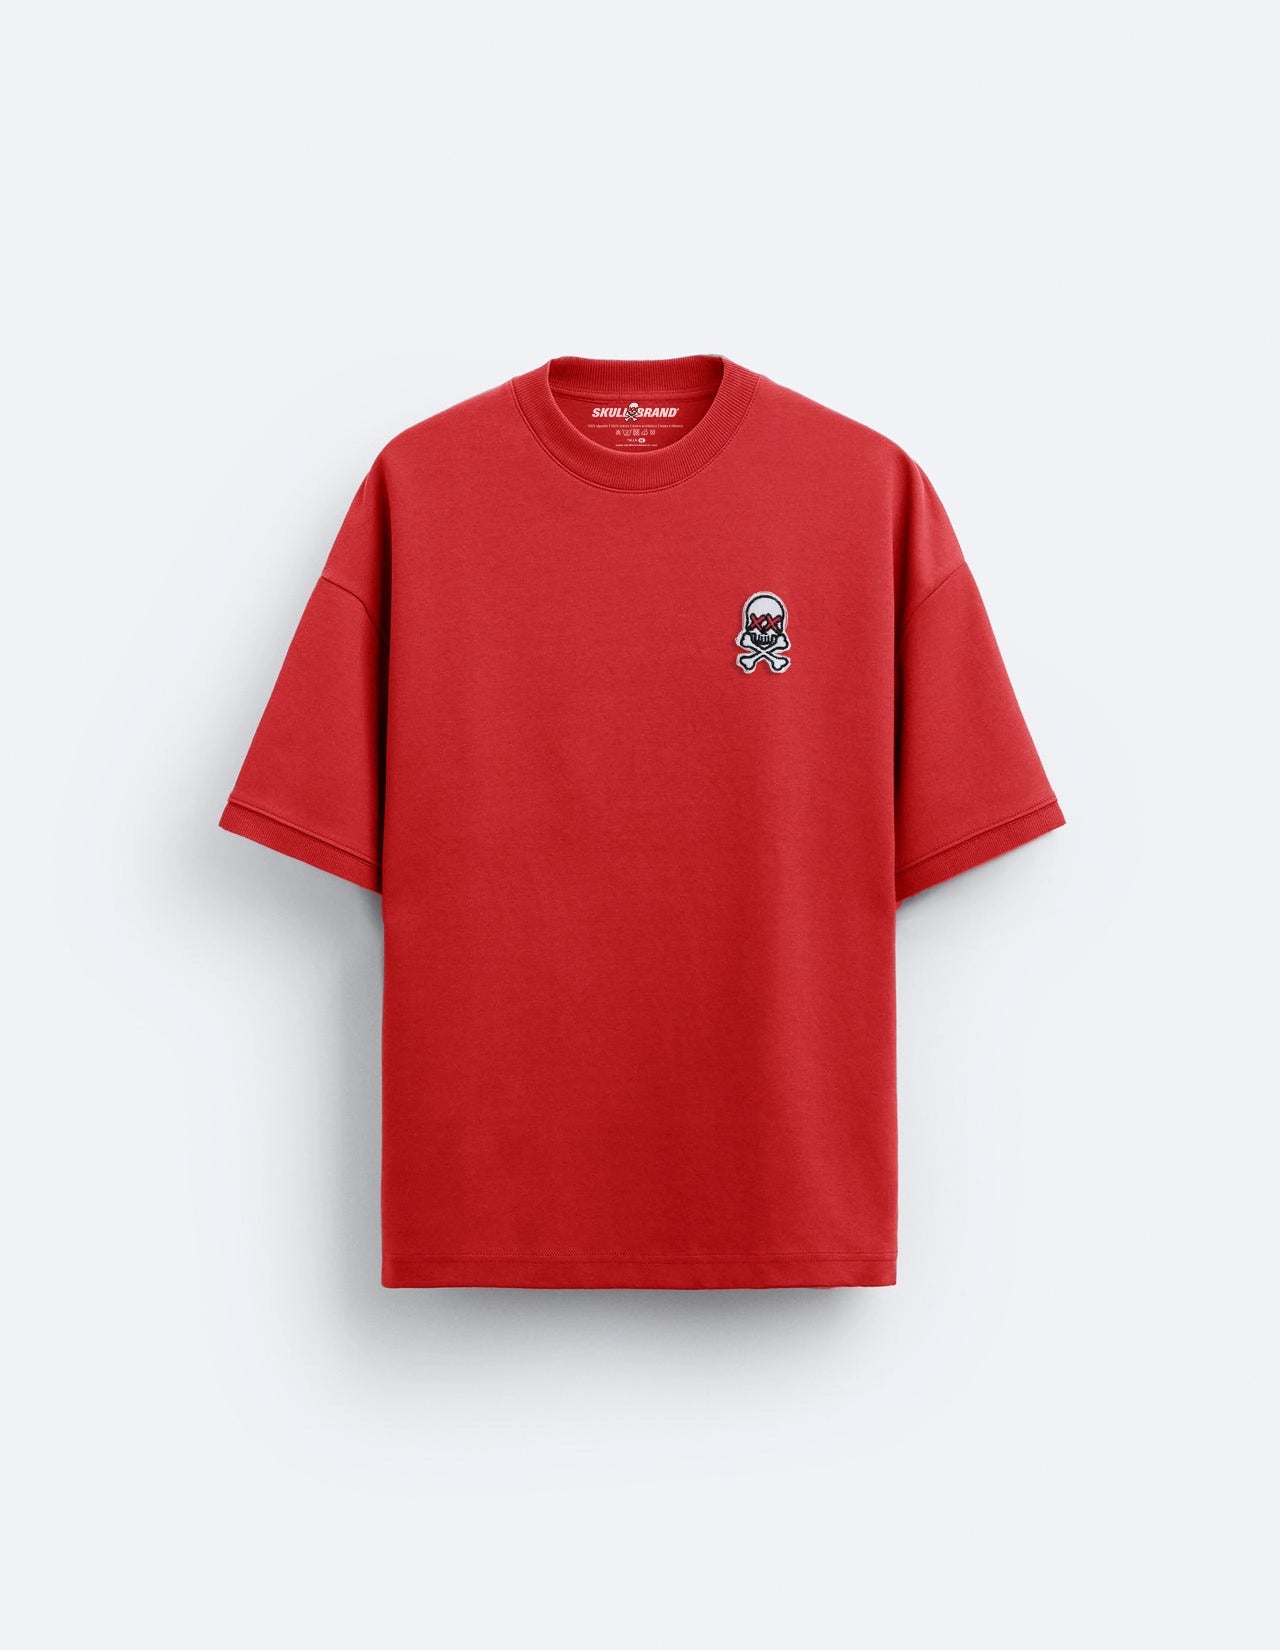 OVERSIZE PRO 2.0 RED